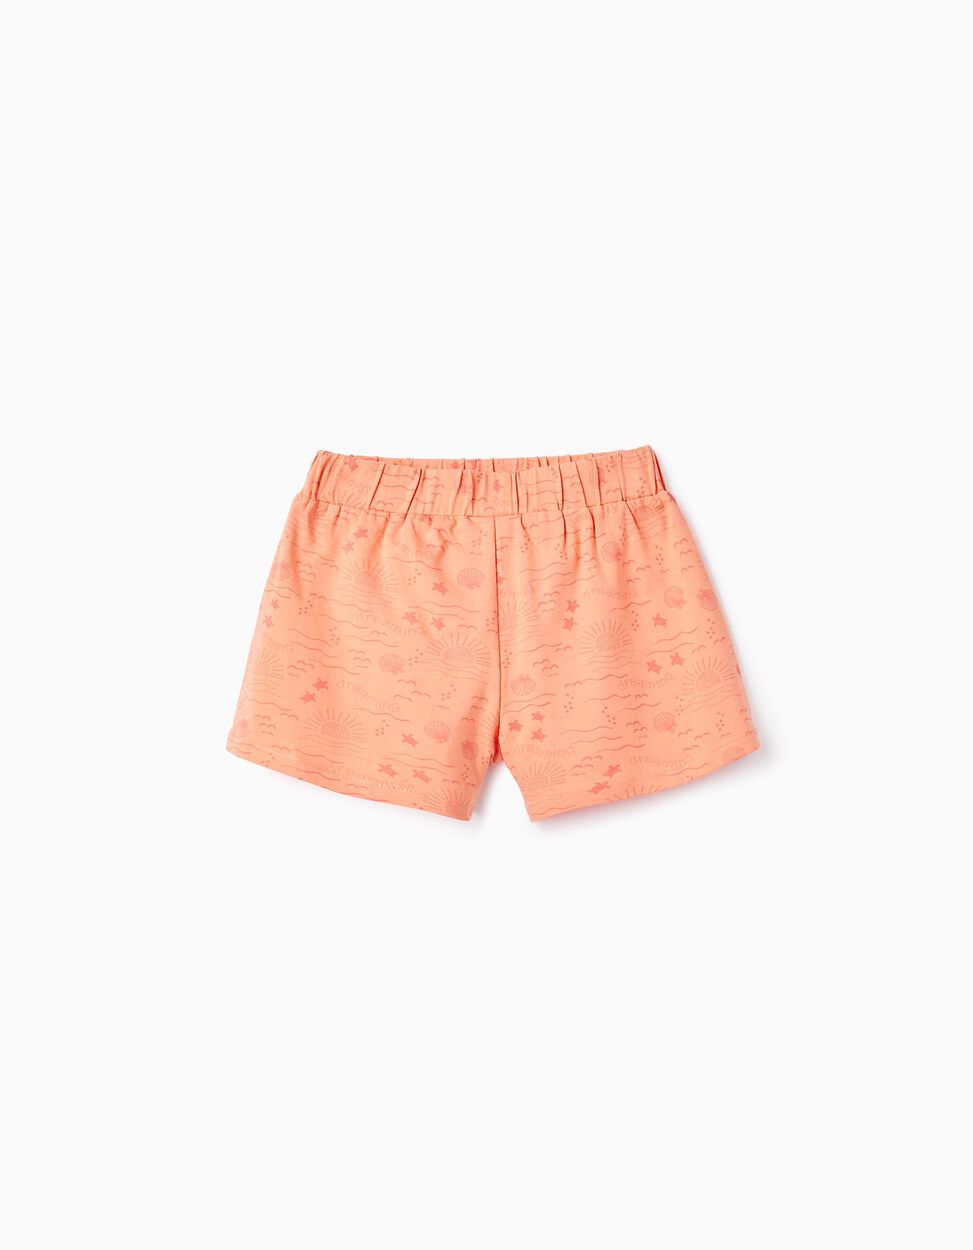 Buy Online 2 Cotton Shorts for Girls 'Dreaming', Coral/Grey